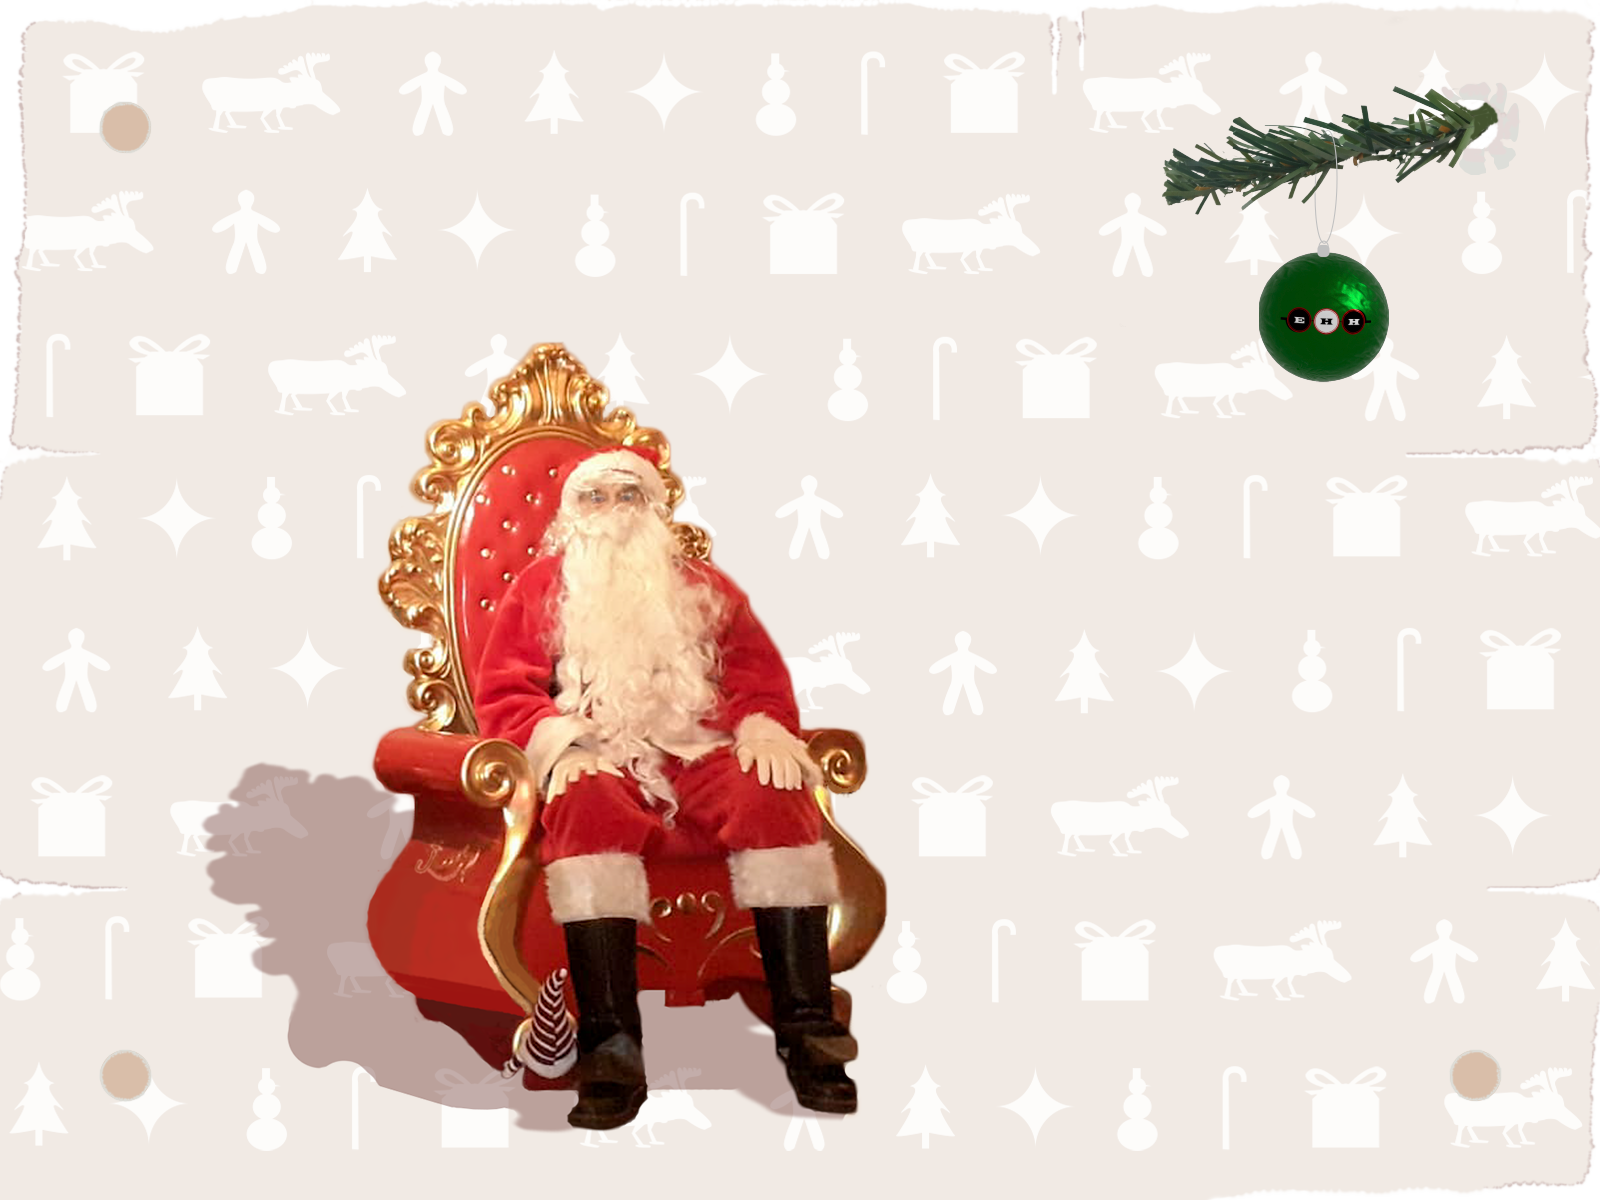 Santa Claus sitting in his arm chair with logo.